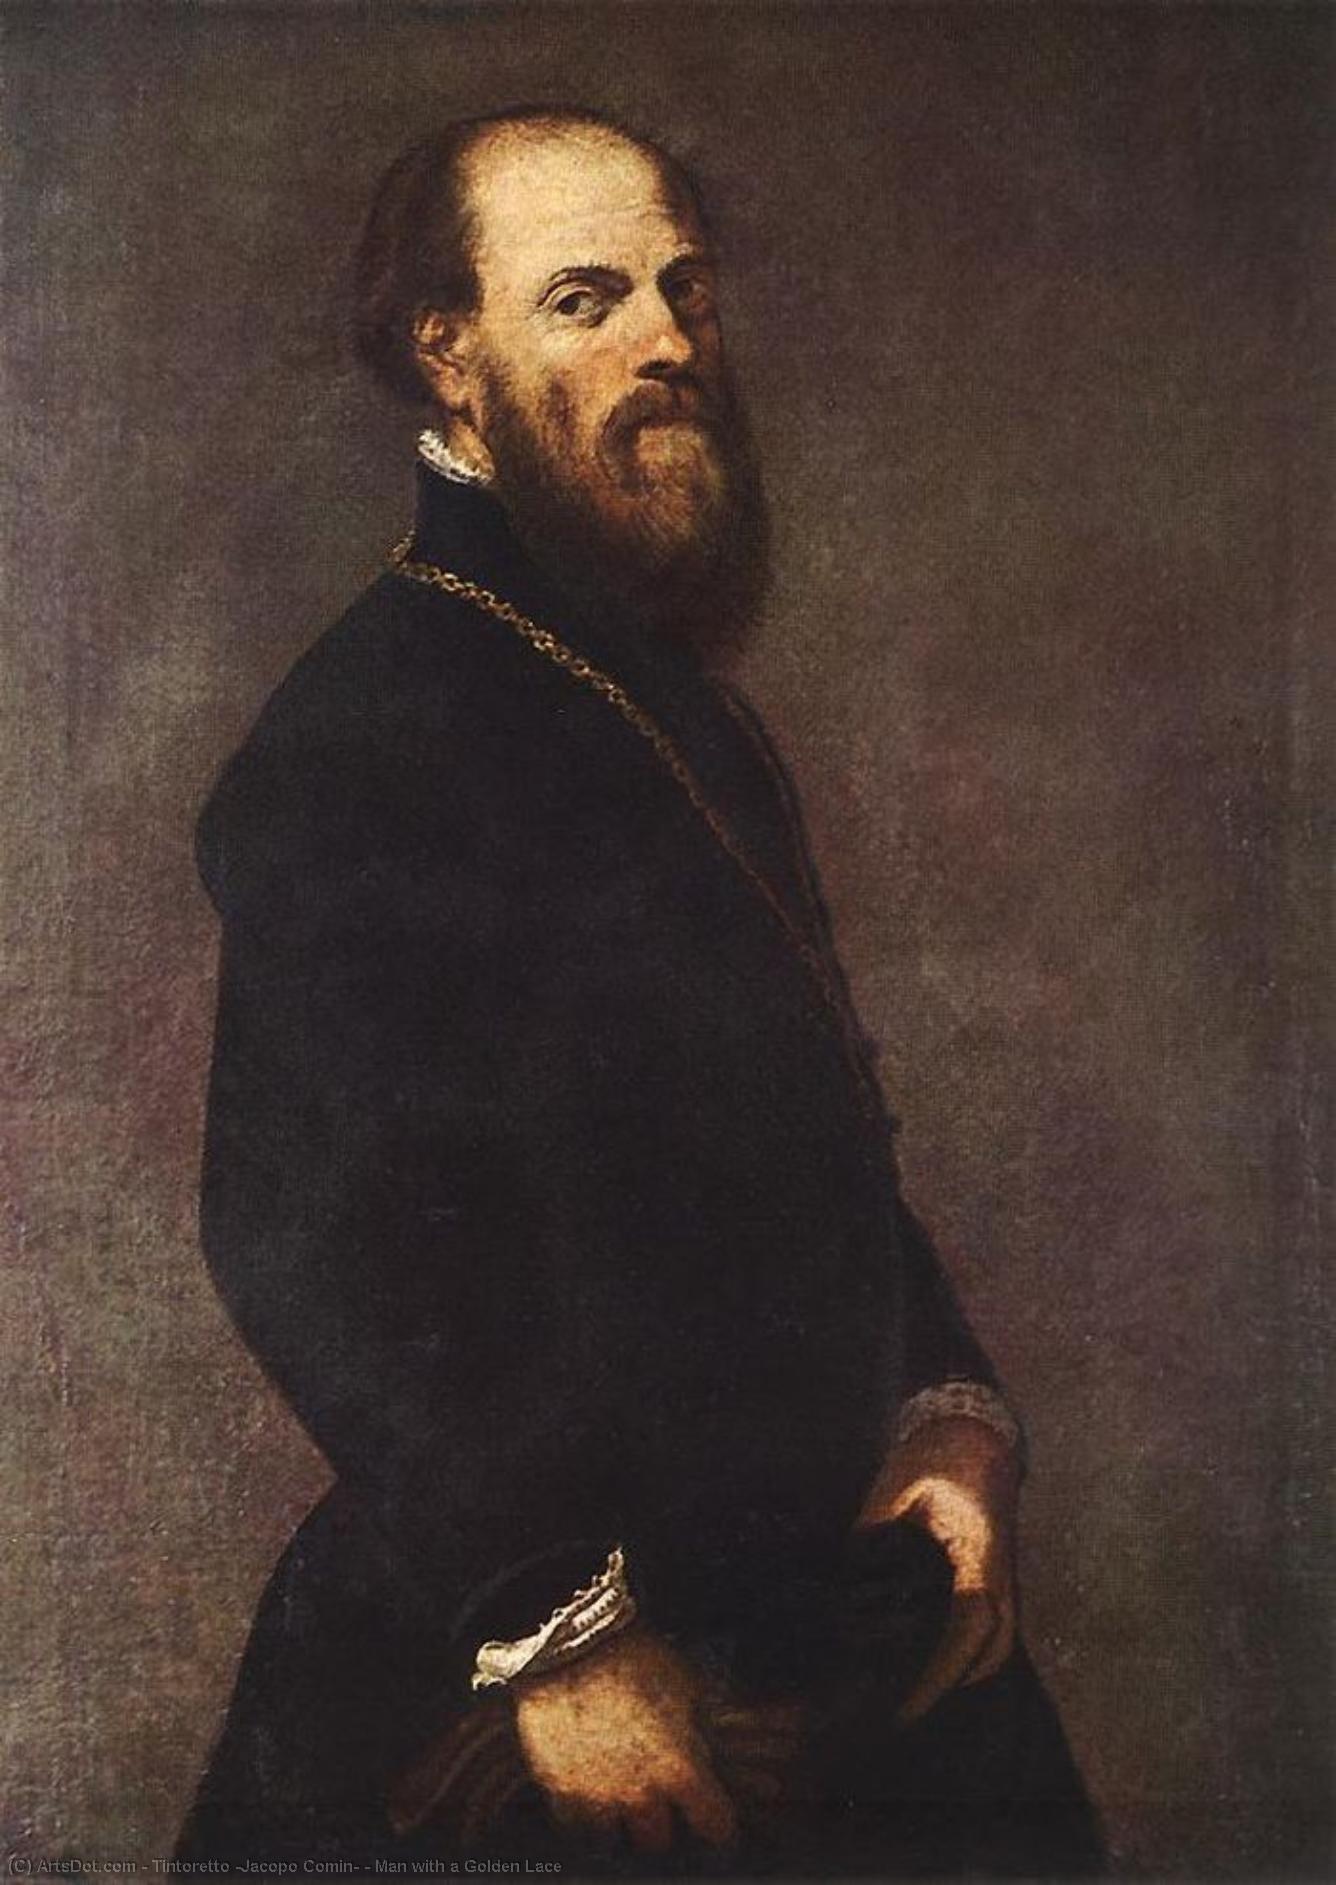 WikiOO.org - Encyclopedia of Fine Arts - Lukisan, Artwork Tintoretto (Jacopo Comin) - Man with a Golden Lace